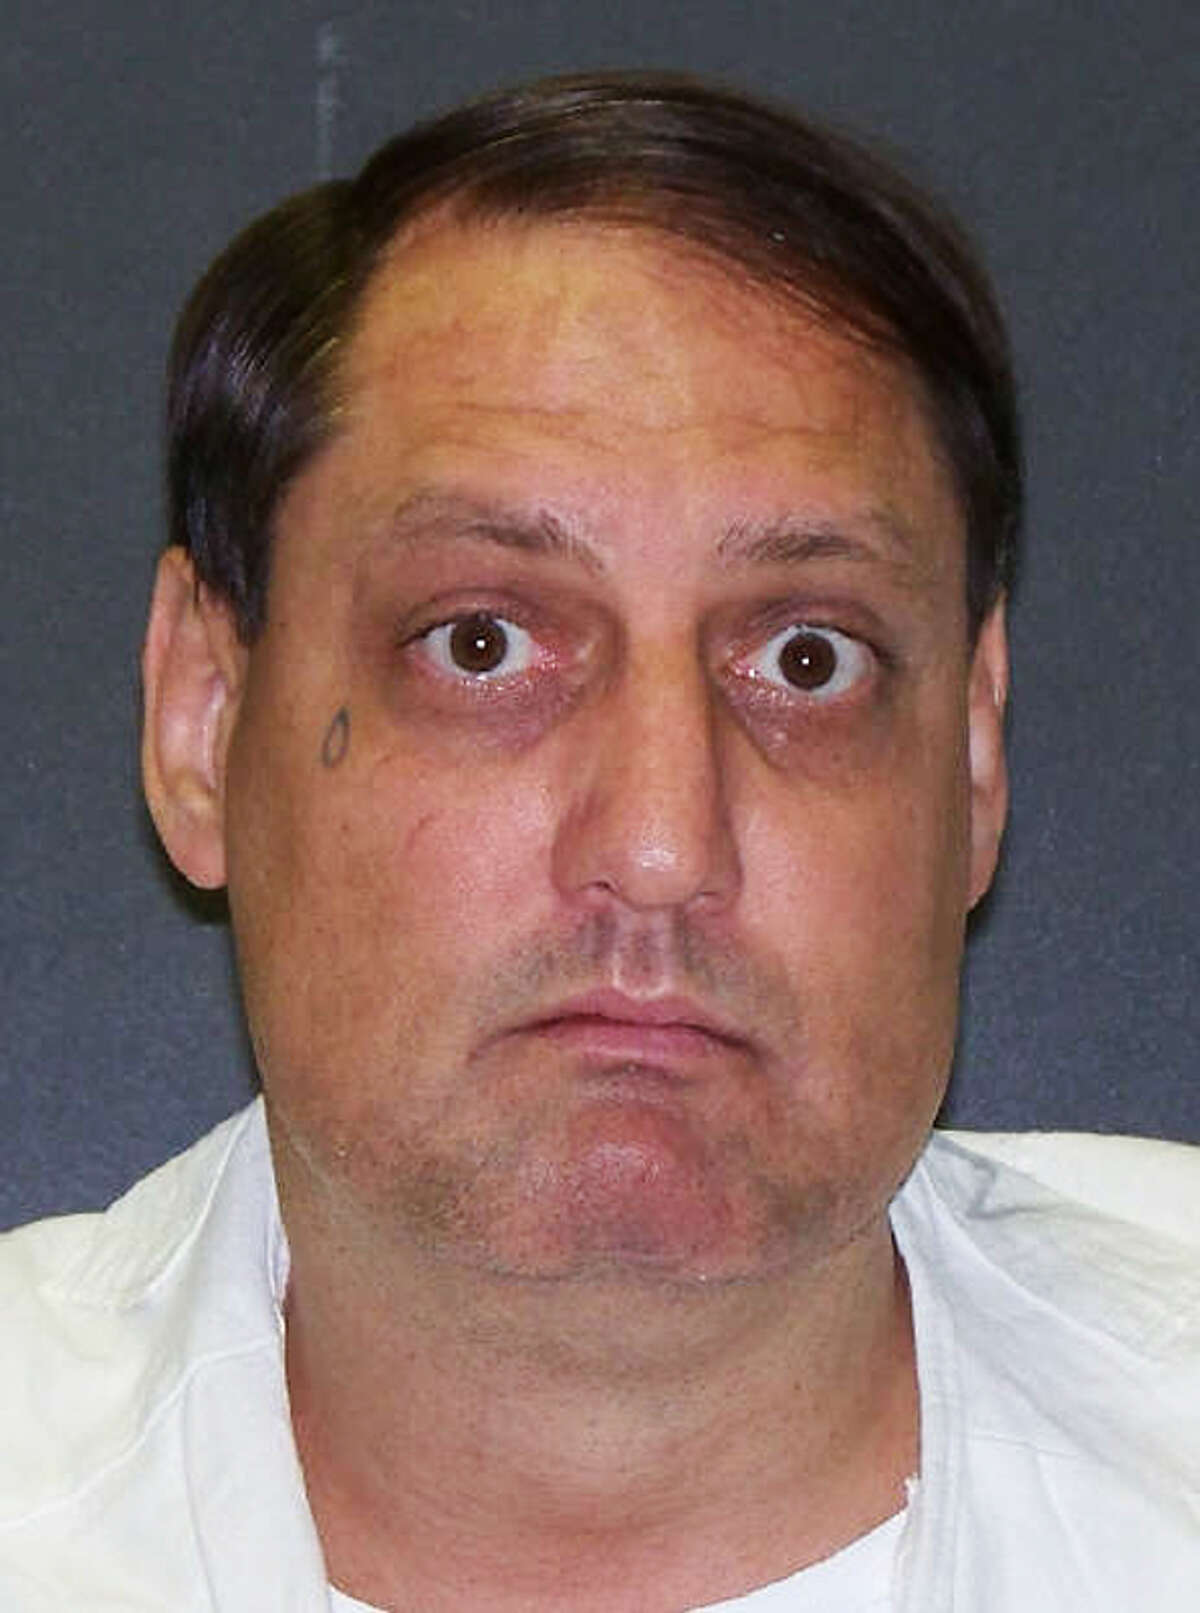 This photo provided by the Texas Department of Criminal Justice shows Jamie McCoskey. McCoskey,49, is scheduled to be executed Tuesday, Nov. 12, 2013 for abducting a Houston couple 22 years ago this week, killing a 21-year-old art student and raping the man’s pregnant fiancé.